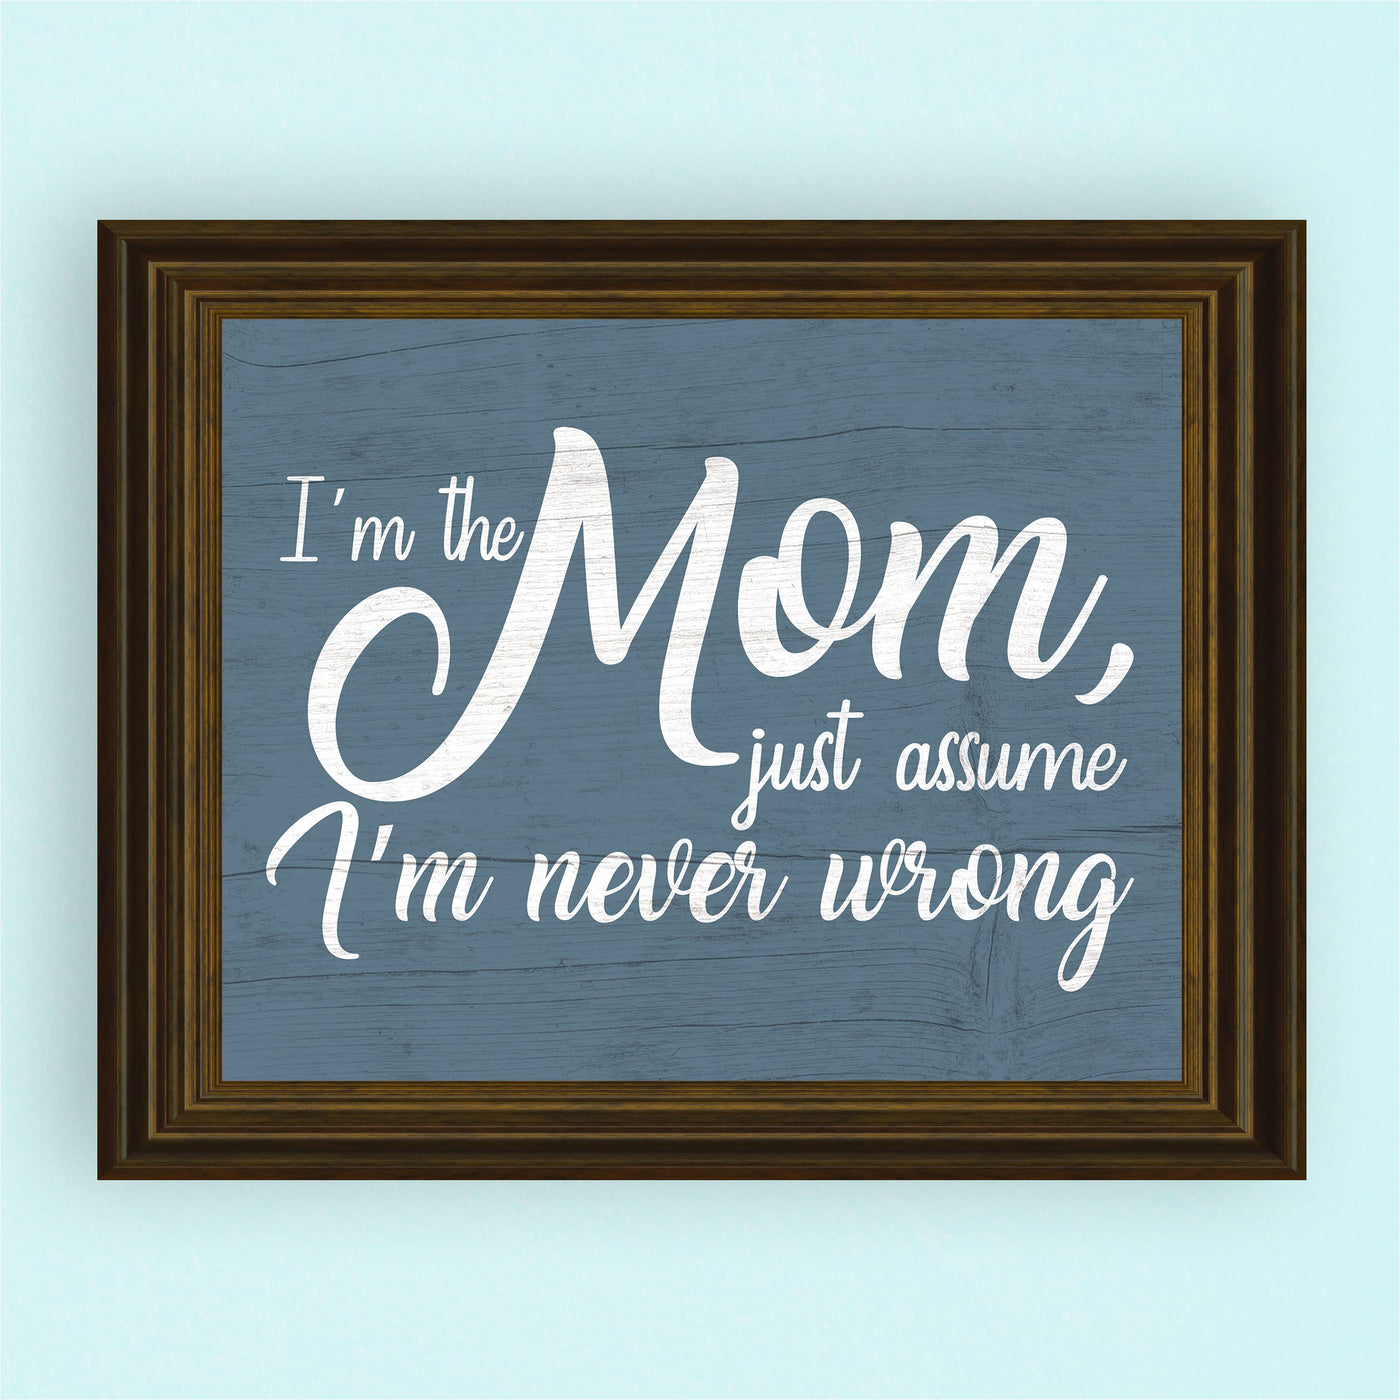 I'm the Mom, Just Assume I'm Never Wrong Funny Wall Art Sign -10 x 8" Rustic Typographic Poster Print-Ready to Frame. Humorous Decoration for Home-Family Room-Patio Decor. Fun Gift for All Moms!